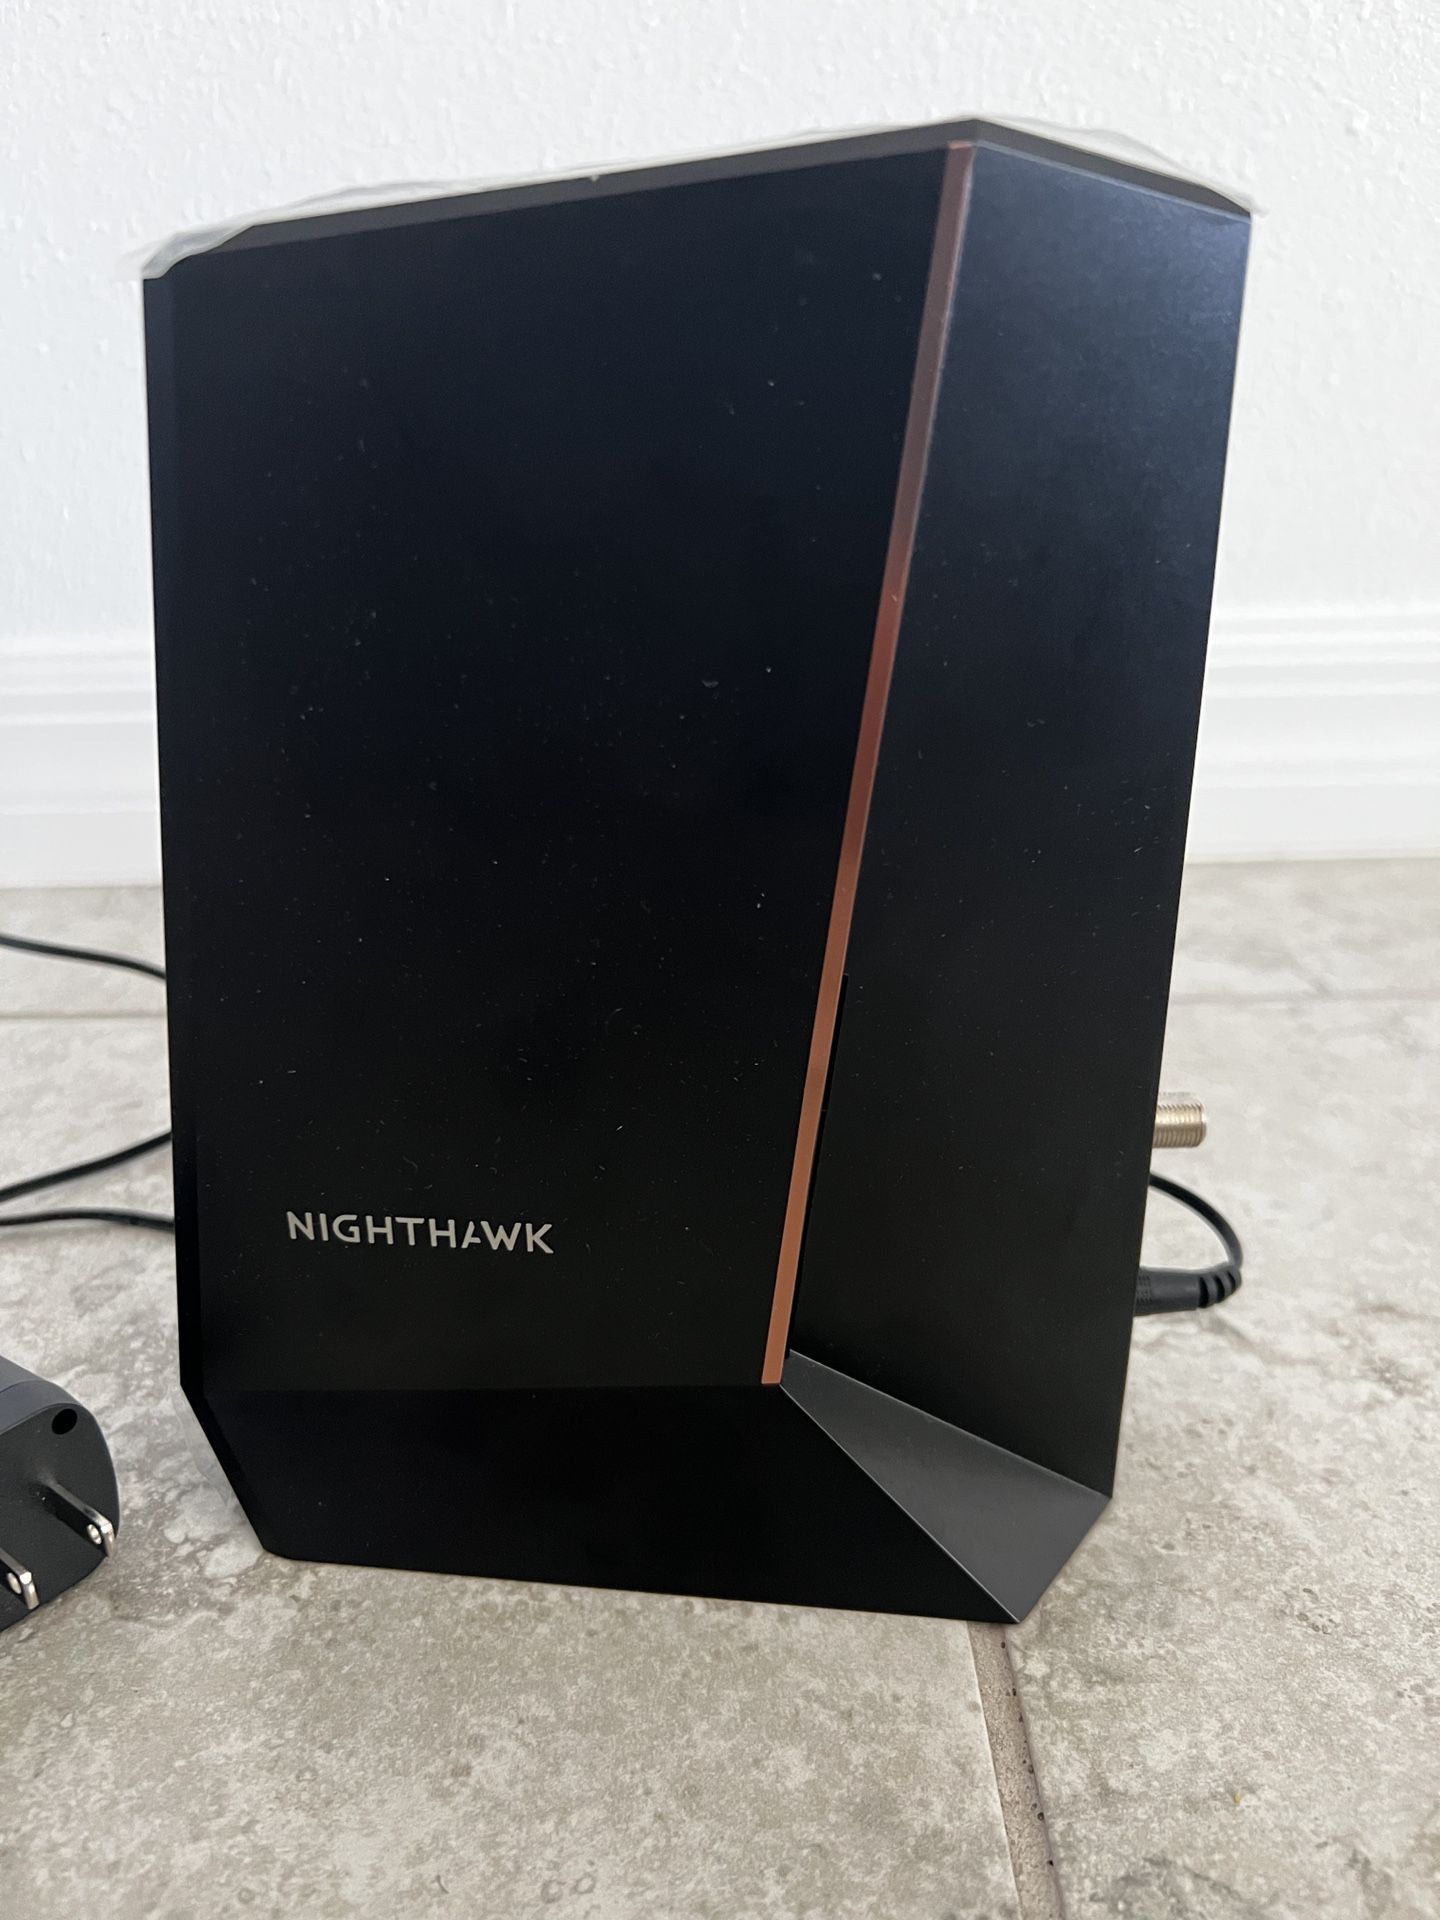 FOR SALE NIGHTHAWK CABLE MODEM